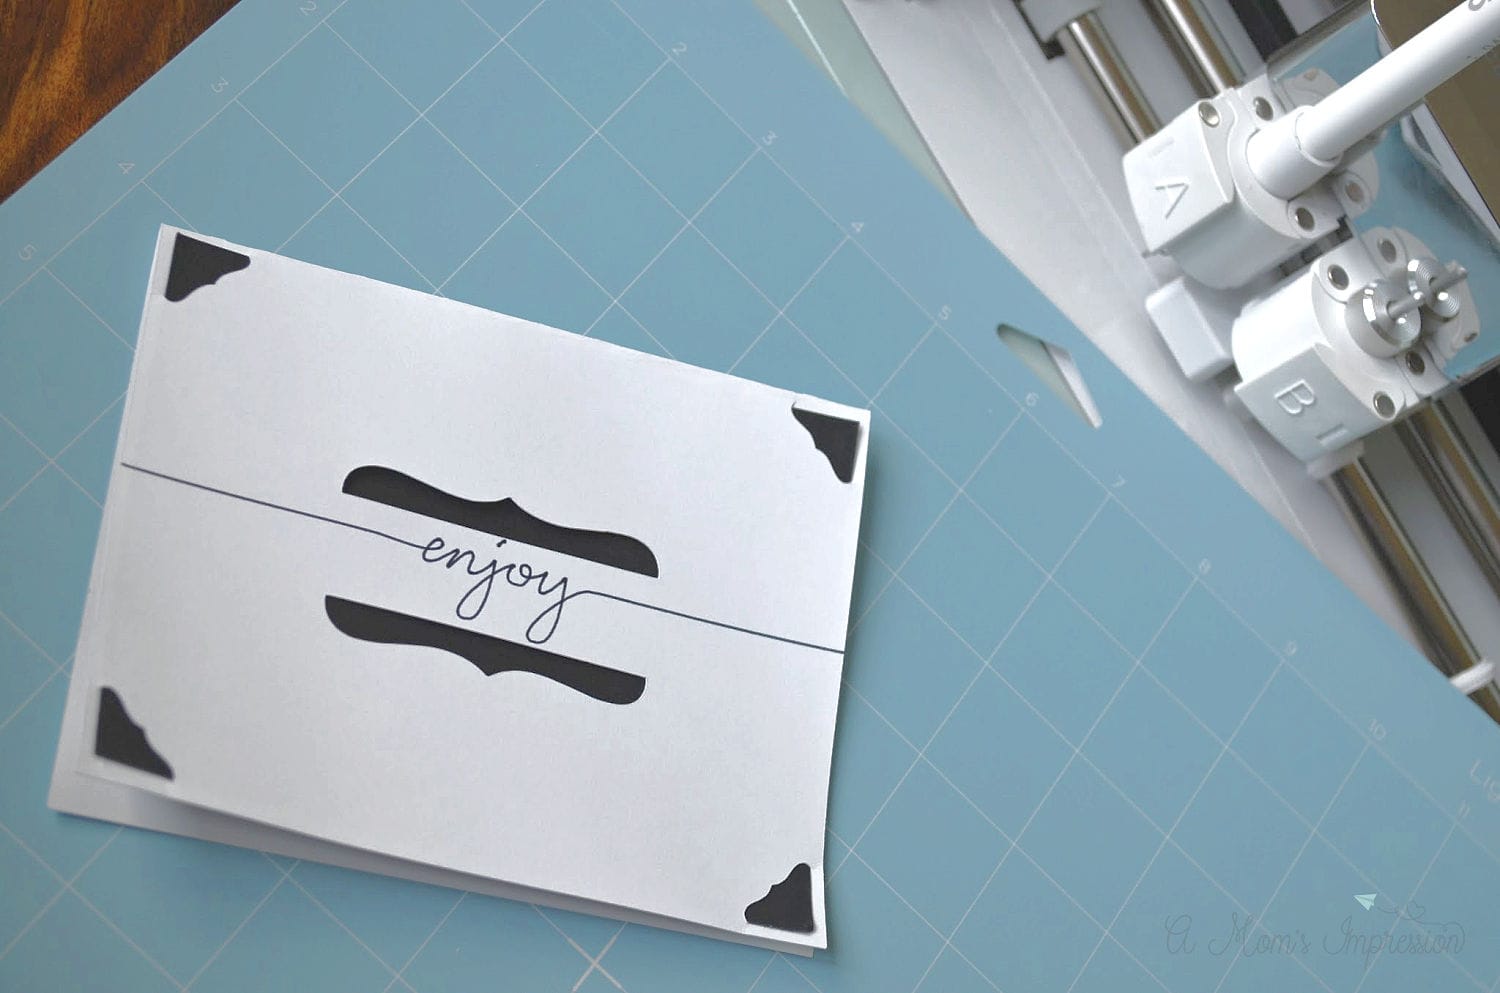 Making a card with Cricut